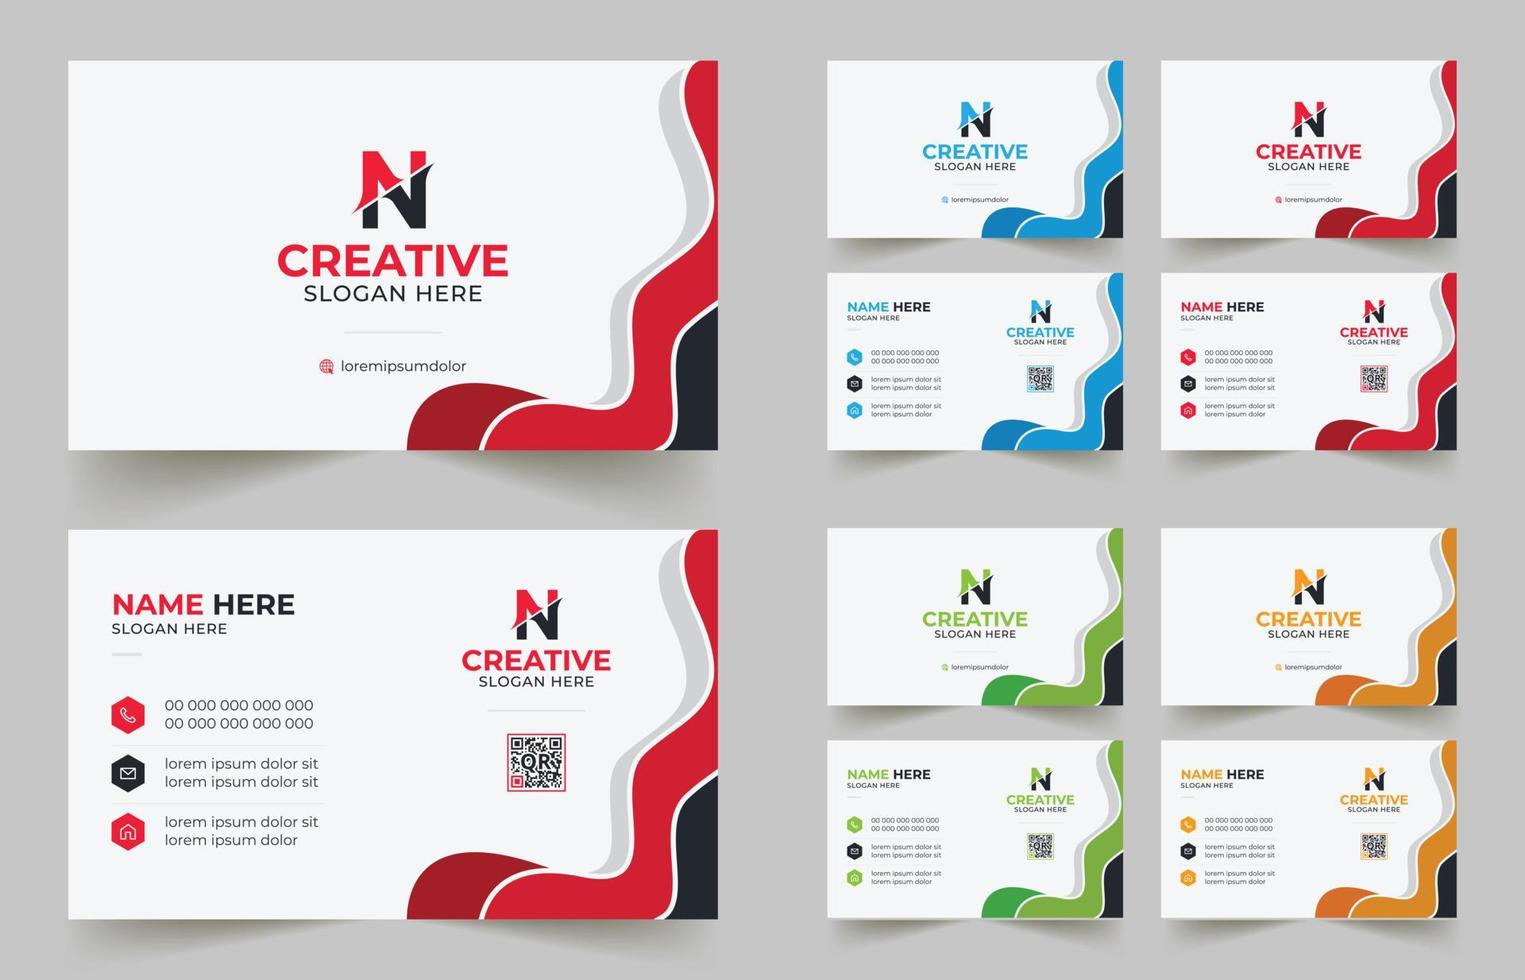 Multipurpose corporate business card template with blue, green, red, and yellow colors vector